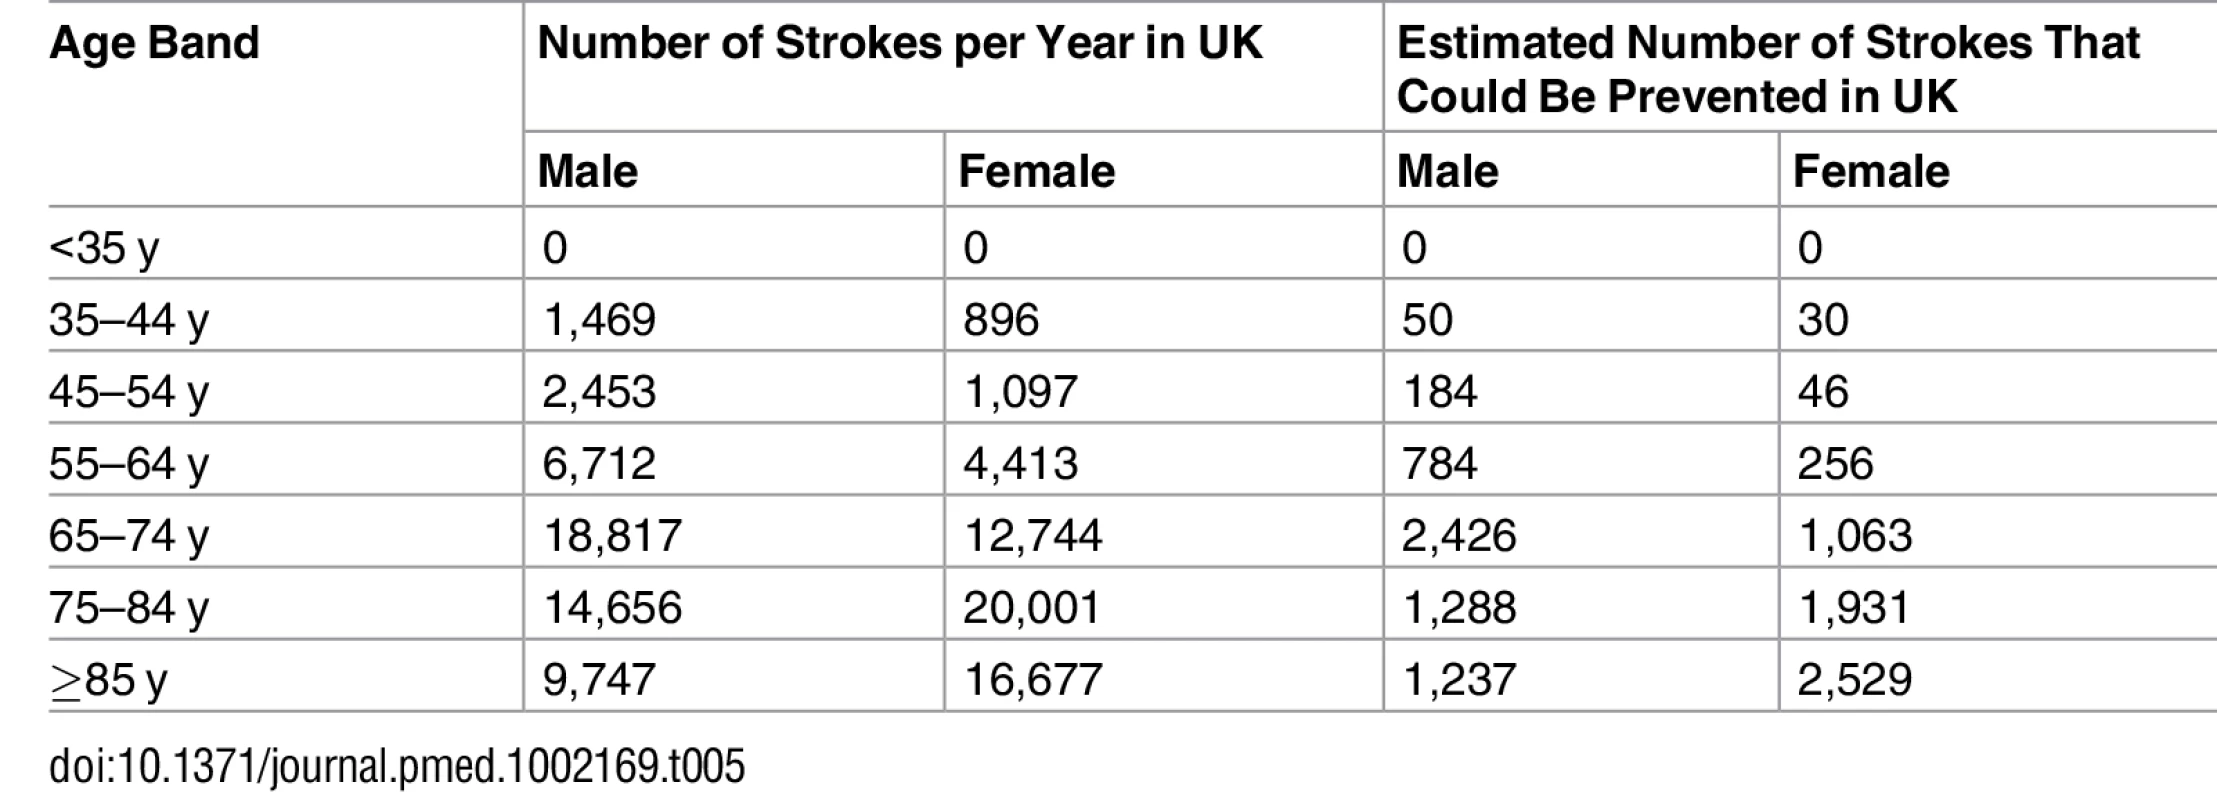 Estimated annual incidence of stroke and number of strokes that could potentially be prevented annually in the UK.